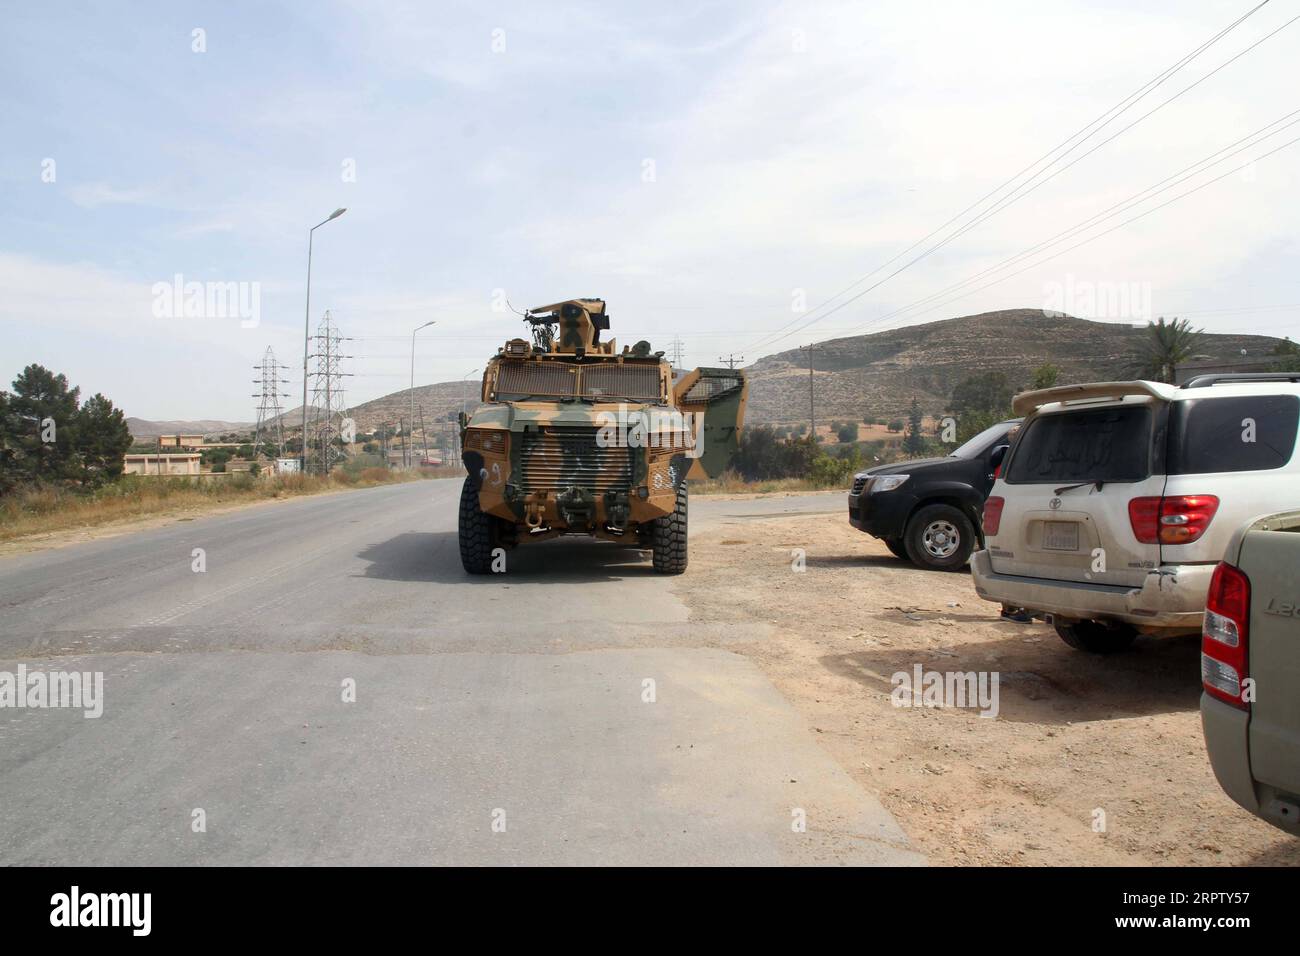 200419 -- TRIPOLI, April 19, 2020 Xinhua -- A vehicle of UN-backed Government of National Accord GNA is seen in Tarhuna, some 90 kilometers south of the capital Tripoli, Libya, April 18, 2020. The UN-backed Libyan government said Saturday it launched a massive attack on the rival east-based army in Tarhuna city, killing eight soldiers of the army and capturing more than 100 others. The government s forces said they launched 17 airstrikes on the east-based army positions in Tarhuna, seizing a number of military vehicles. Photo by Hamza Turkia/Xinhua LIBYA-TRIPOLI-ATTACK PUBLICATIONxNOTxINxCHN Stock Photo